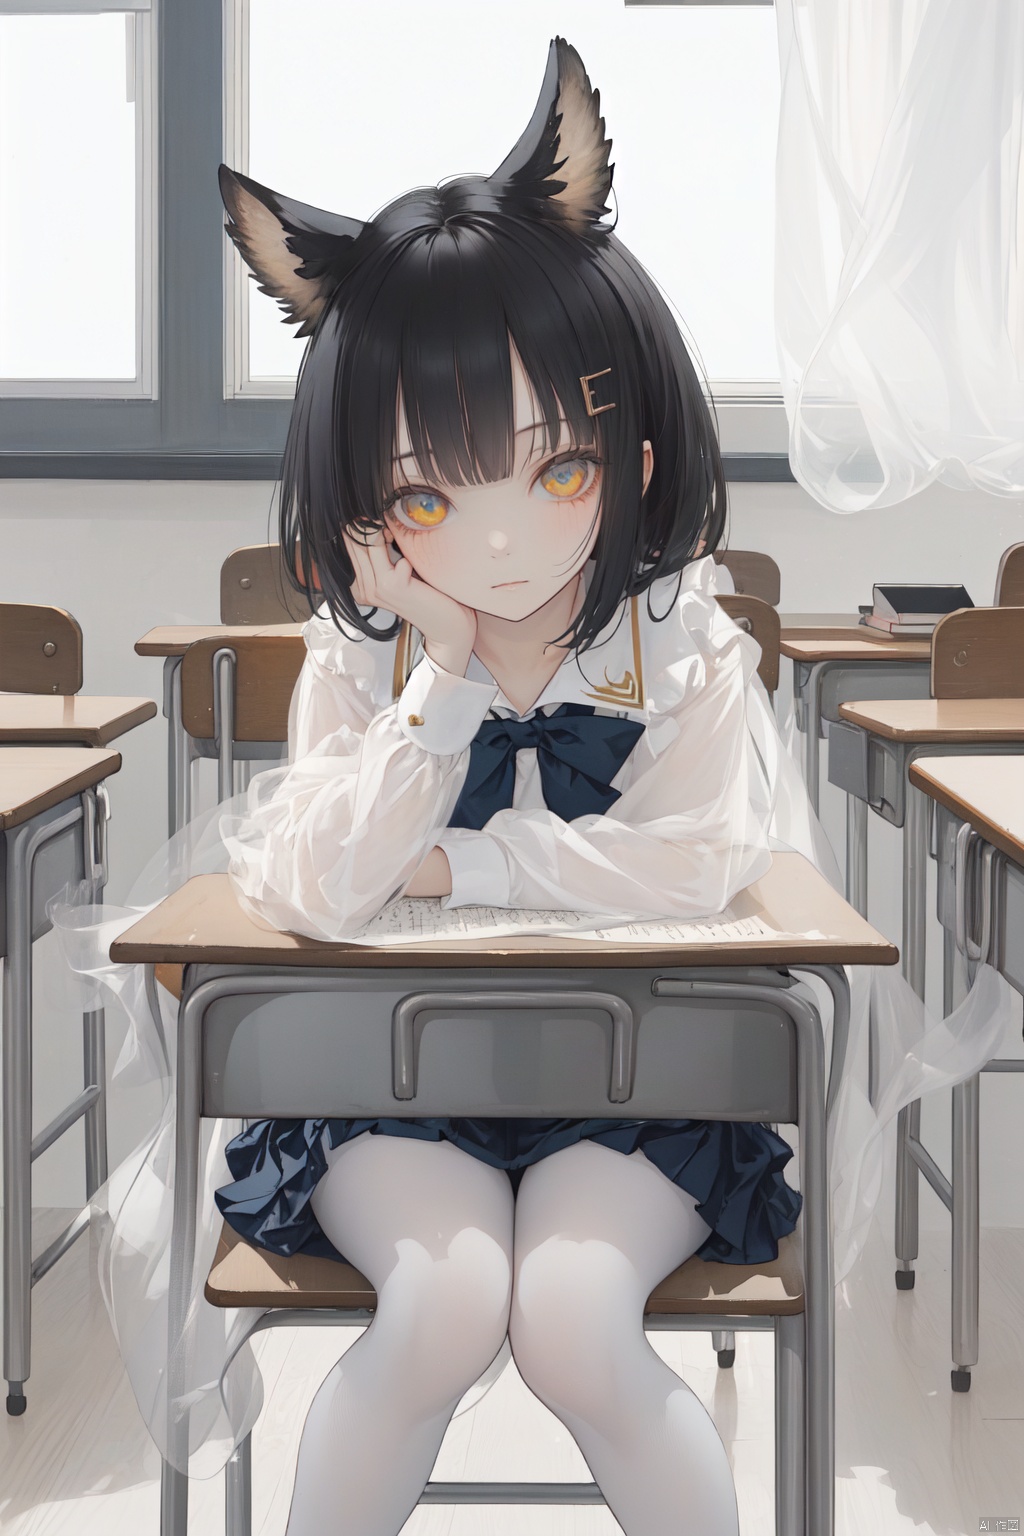 best_quality, extremely detailed details, loli,underage,((shrot)),1_girl,solo,full_body,cute_face,pretty face,extremely delicate and beautiful girls,(beautiful detailed eyes),yellow_eyes,black_hair ,fox_ears,fox_tail,see_through_clothes, school,classroom,desk,chair,school_suit, nagato_(azur_lane),nagatowhite, white pantyhose